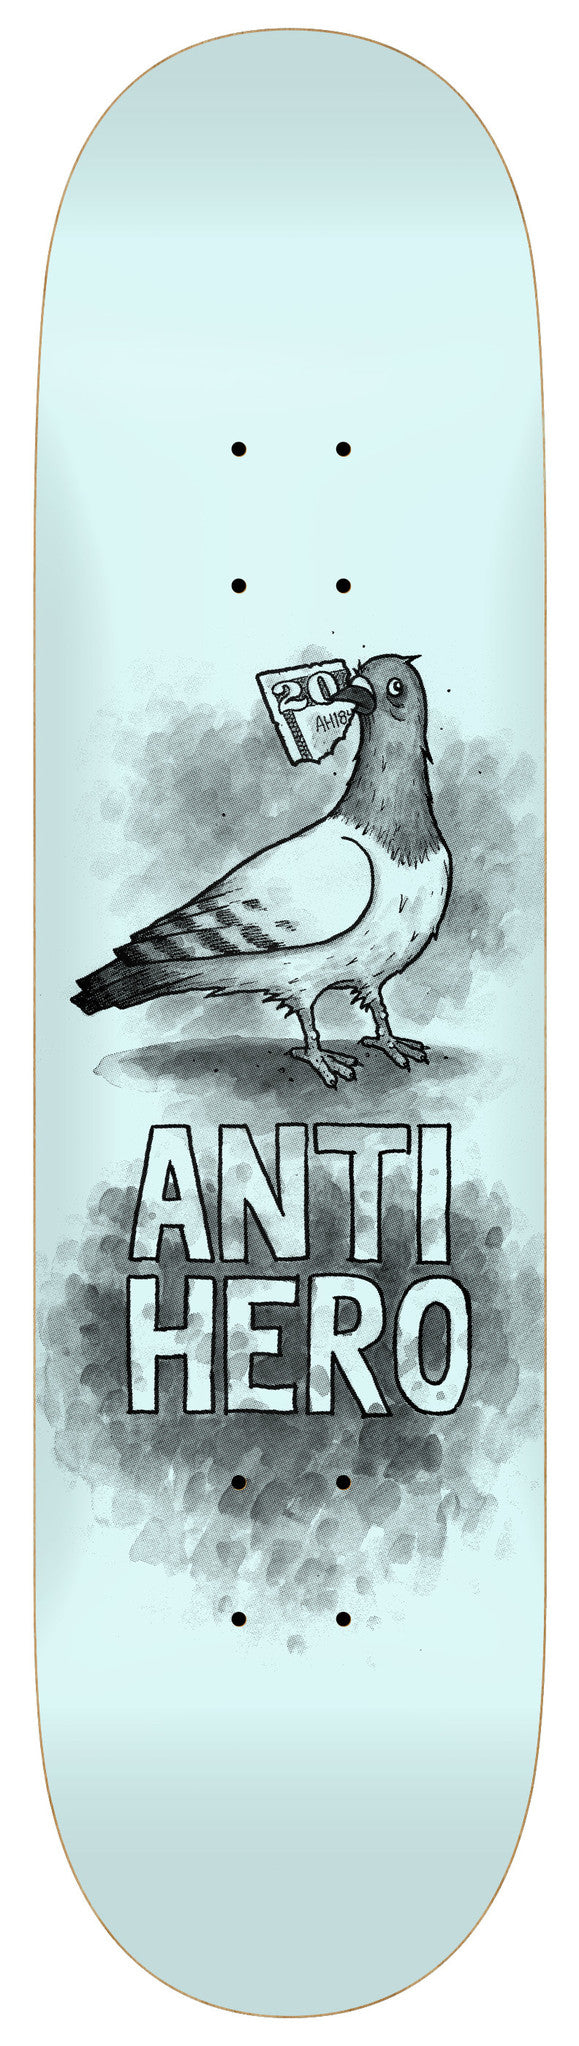 Introducing the ANTI HERO BUDGIE PRICE POINT 8.06 skateboard deck by ANTIHERO. This deck is perfect for those who crave the edgy style of an ANTI HERO design.